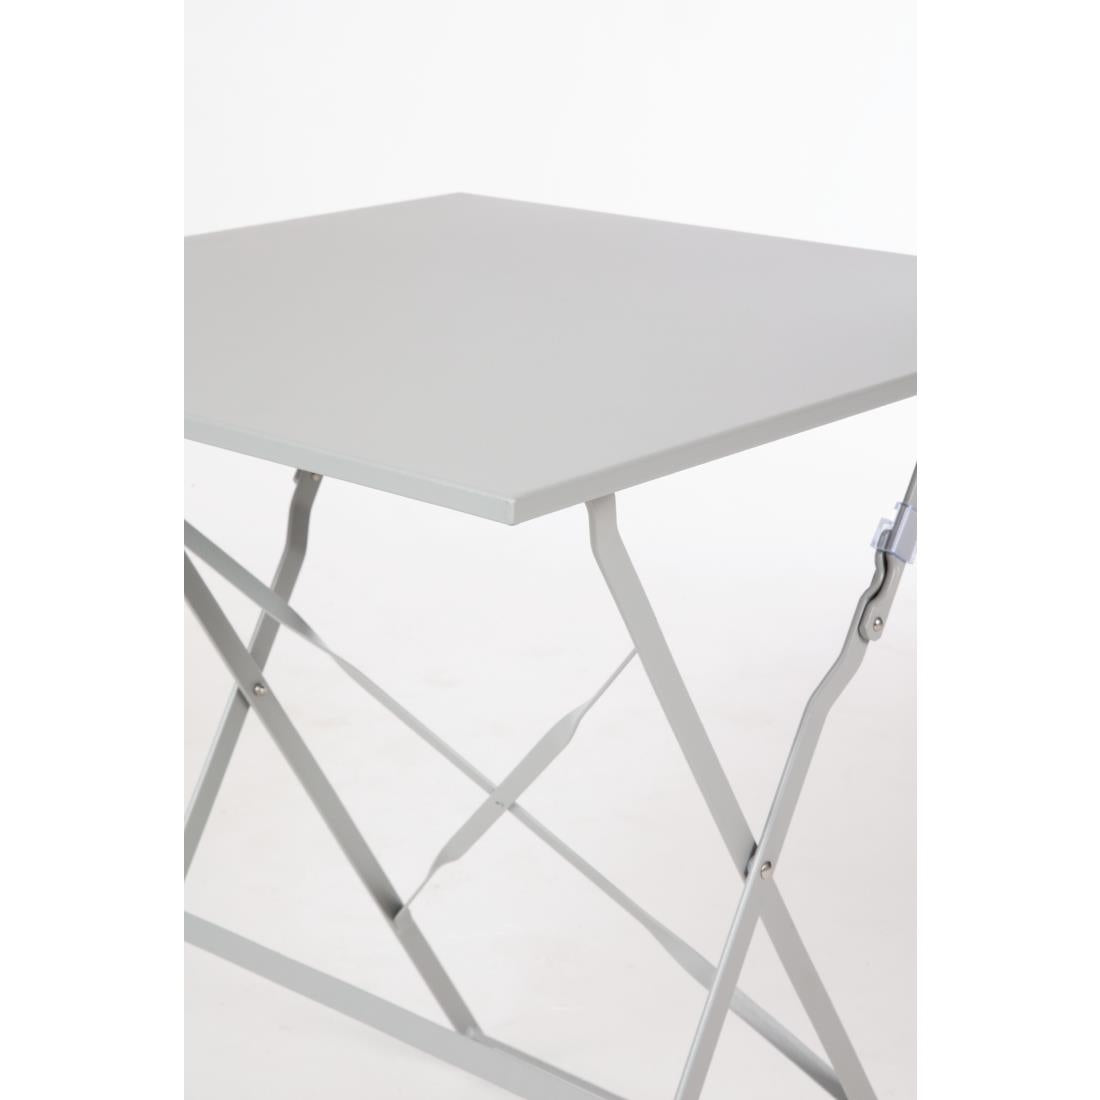 Bolero Grey Square Pavement Style Steel Table JD Catering Equipment Solutions Ltd